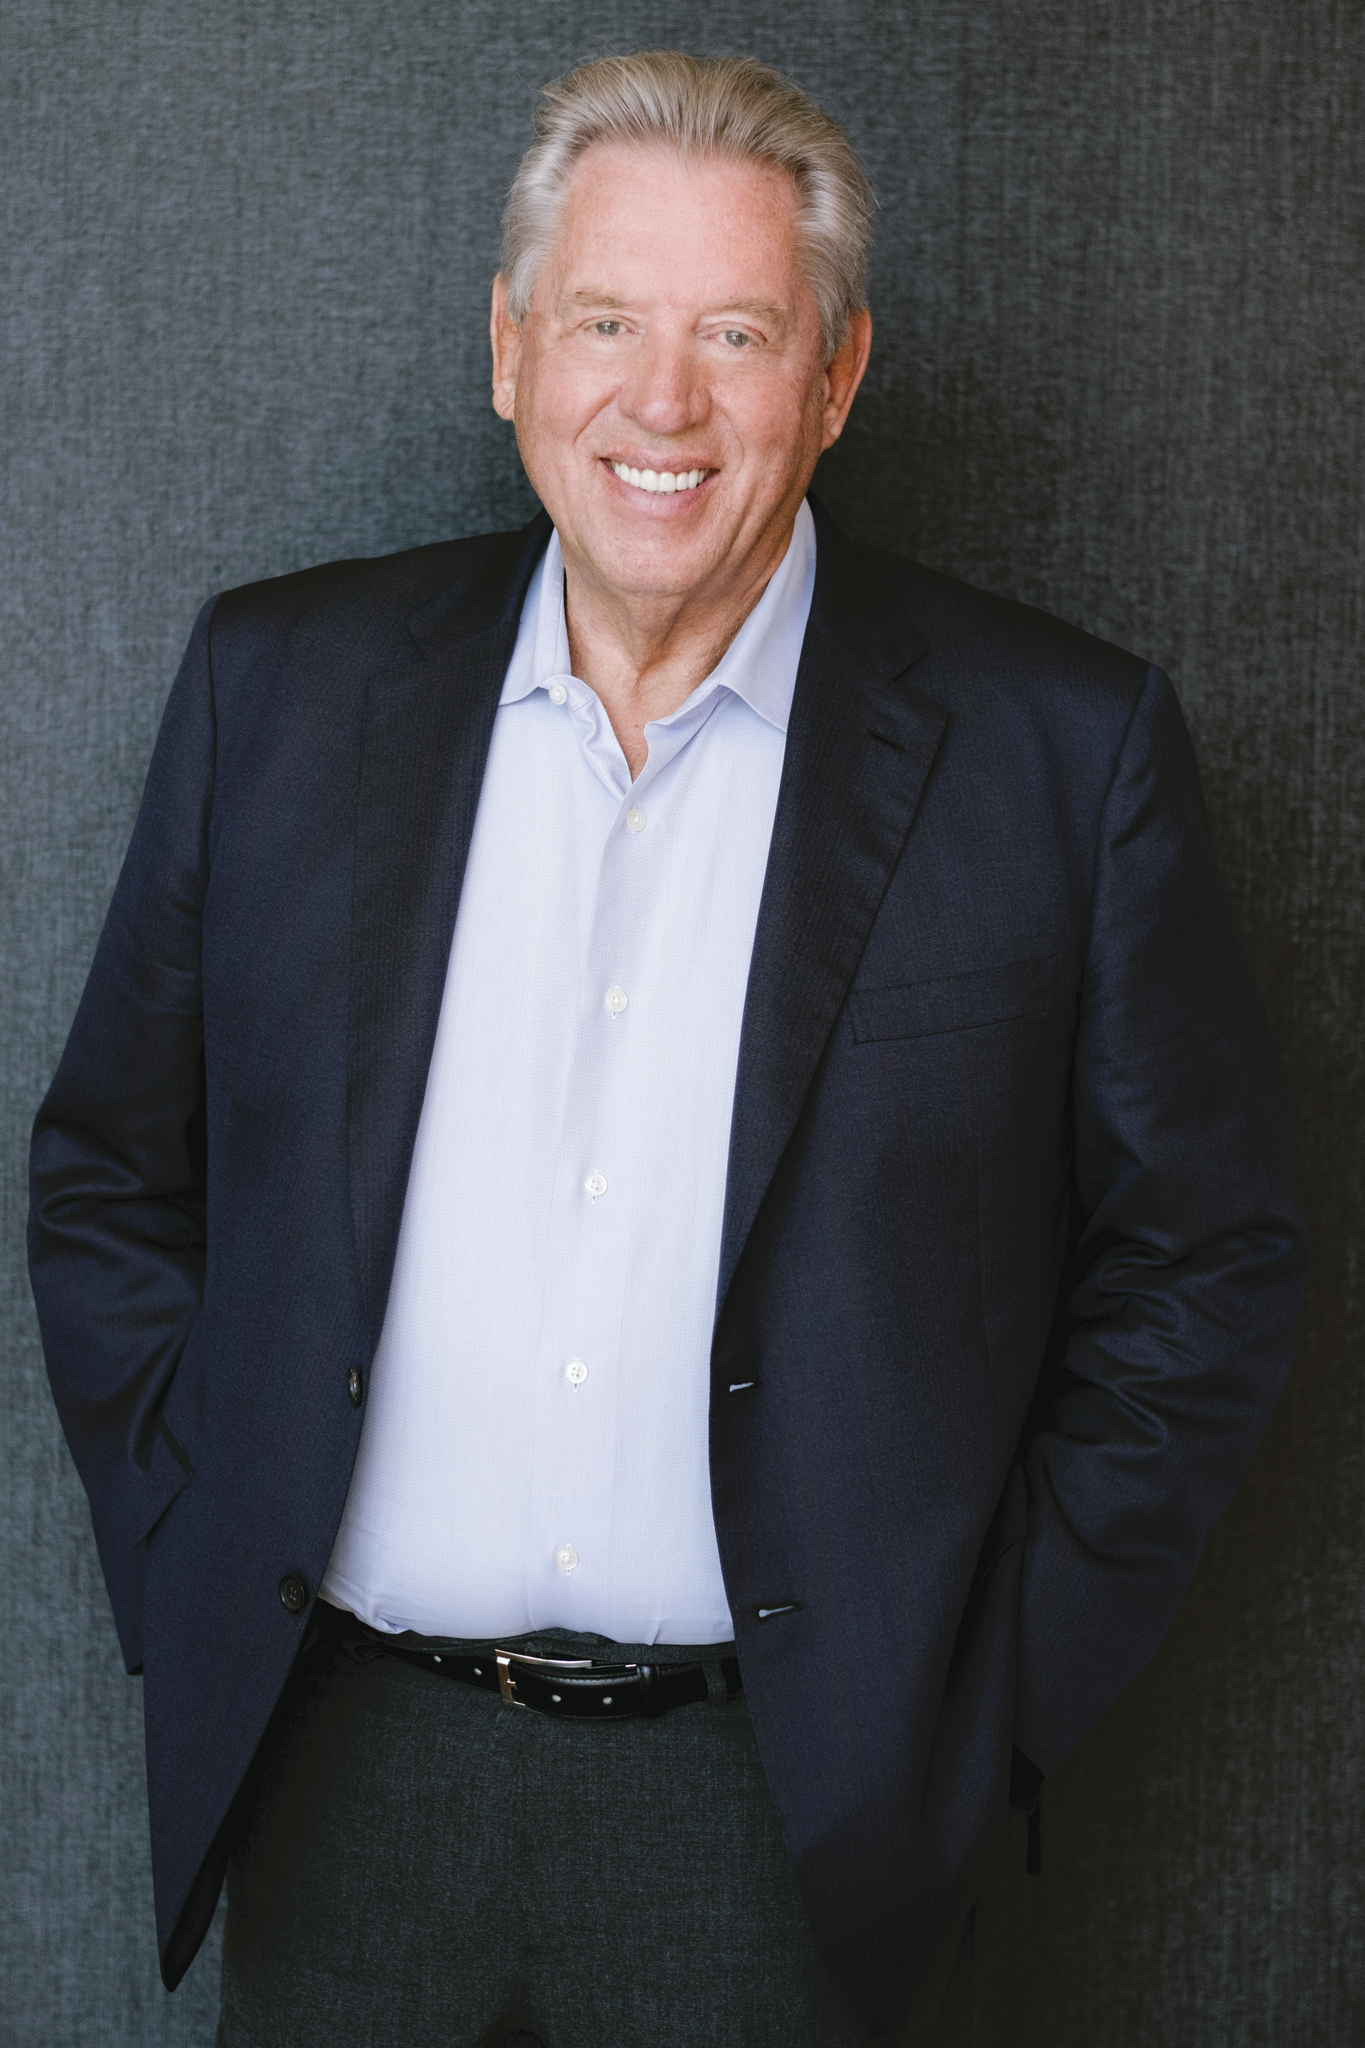 John Maxwell shares leadership insights on Business Report’s 21st